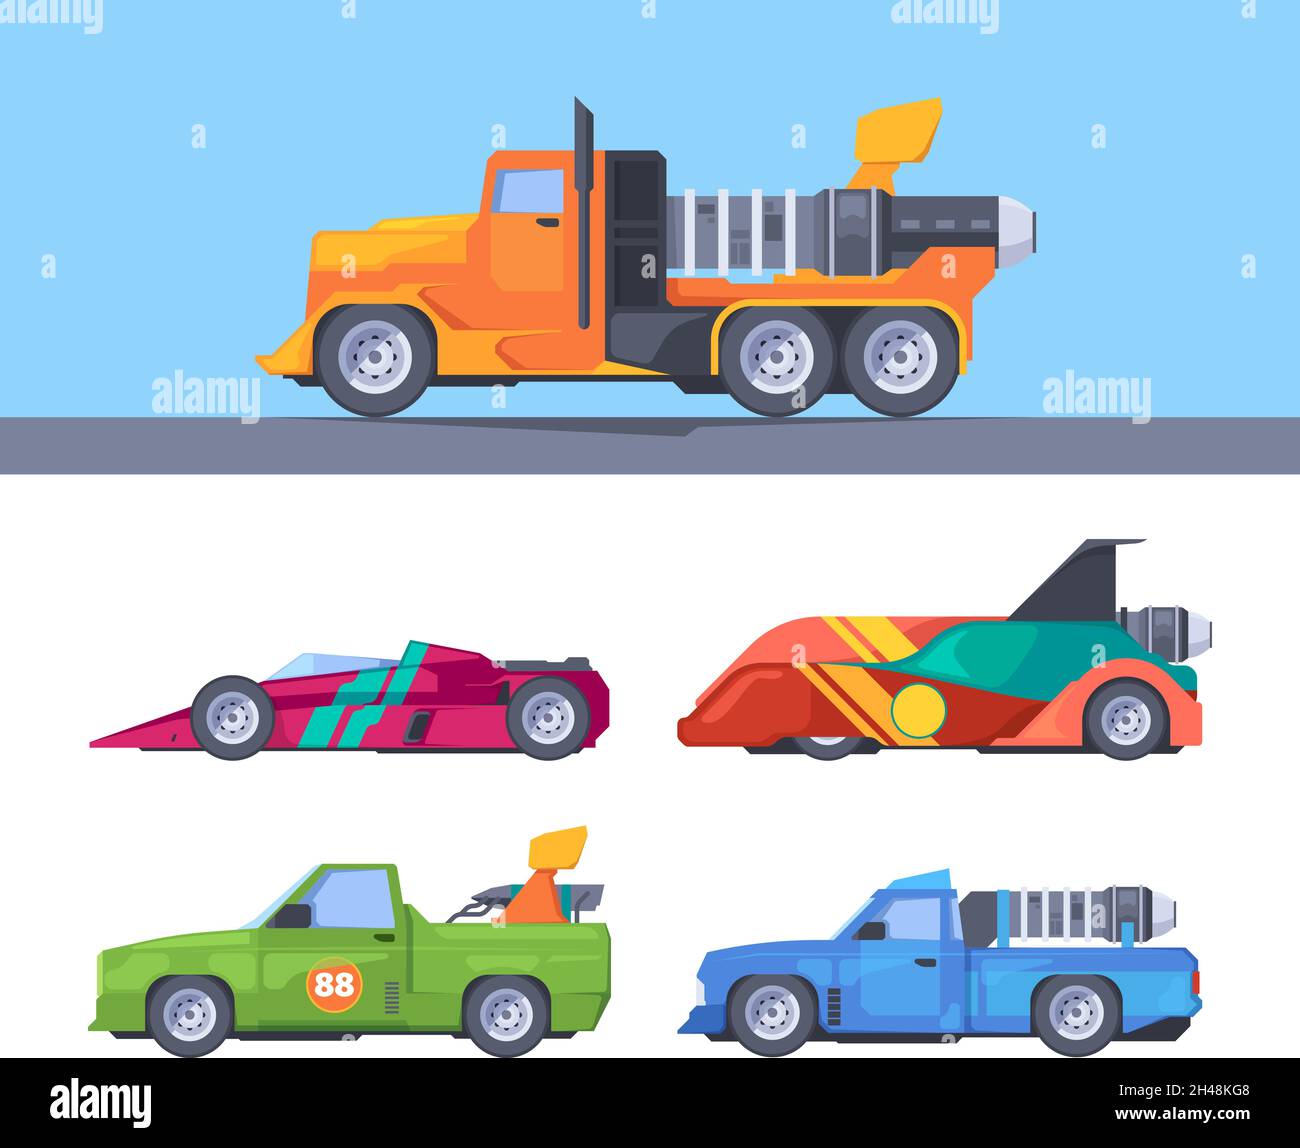 Fast trucks. Fuel moving sport vehicles acceleration nitrous oxide fire flame shapes garish vector fast cars collection in flat style Stock Vector